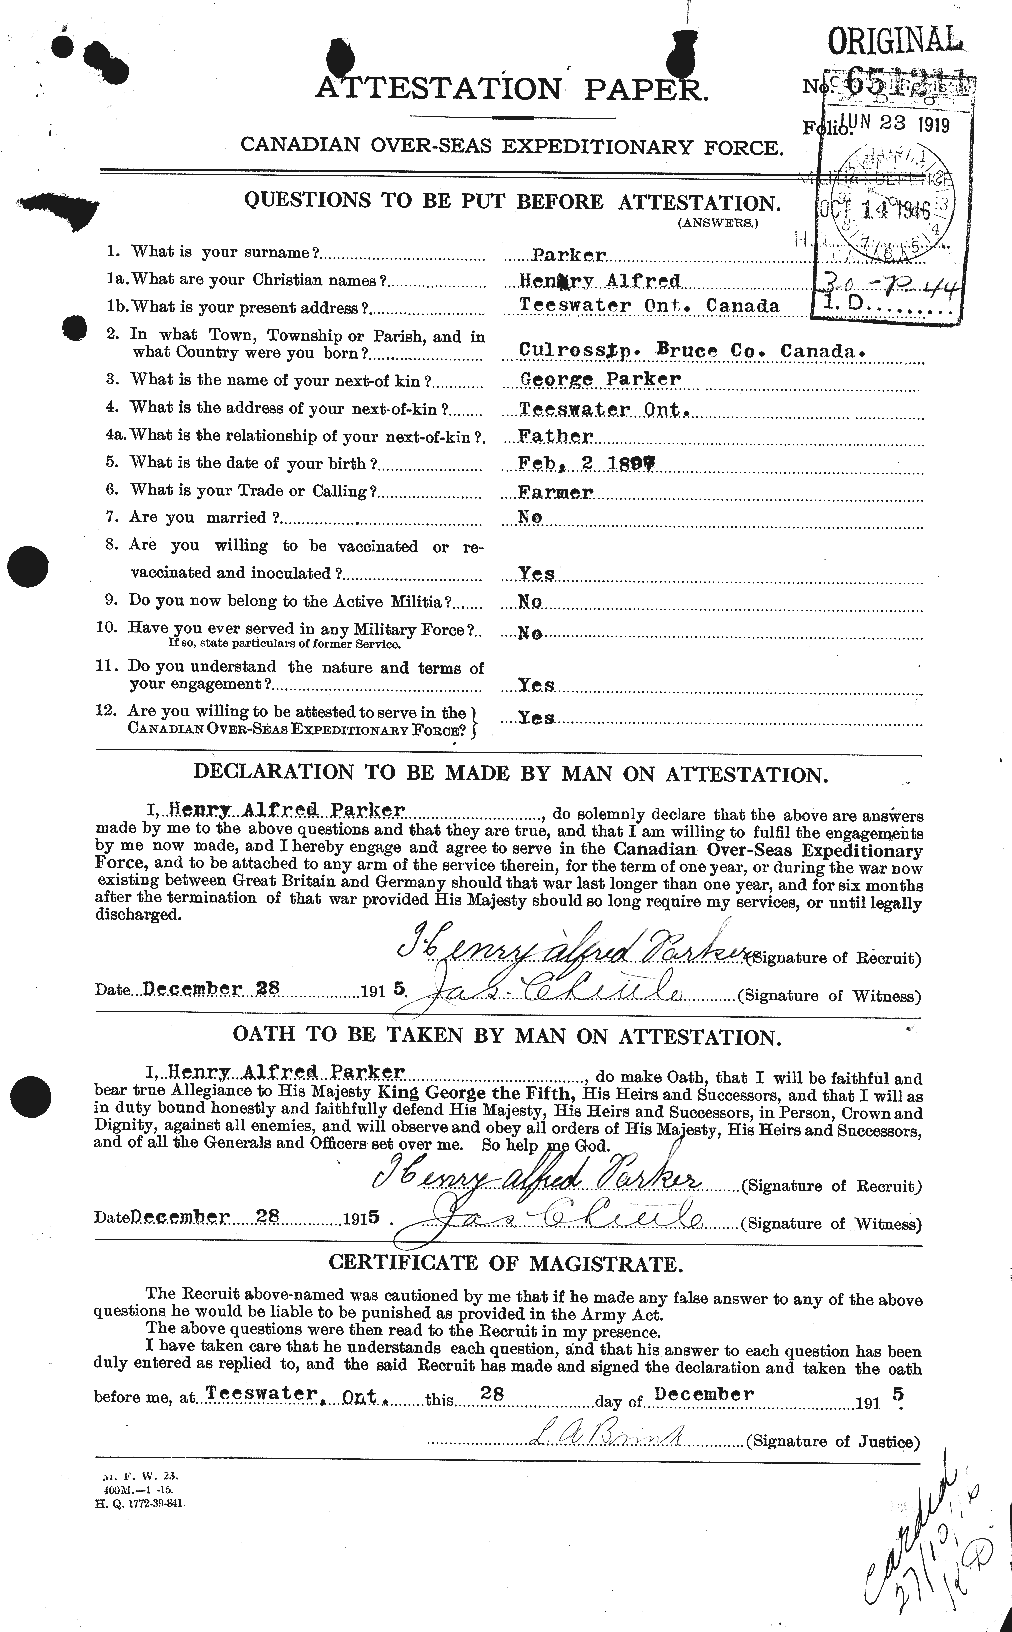 Personnel Records of the First World War - CEF 565348a